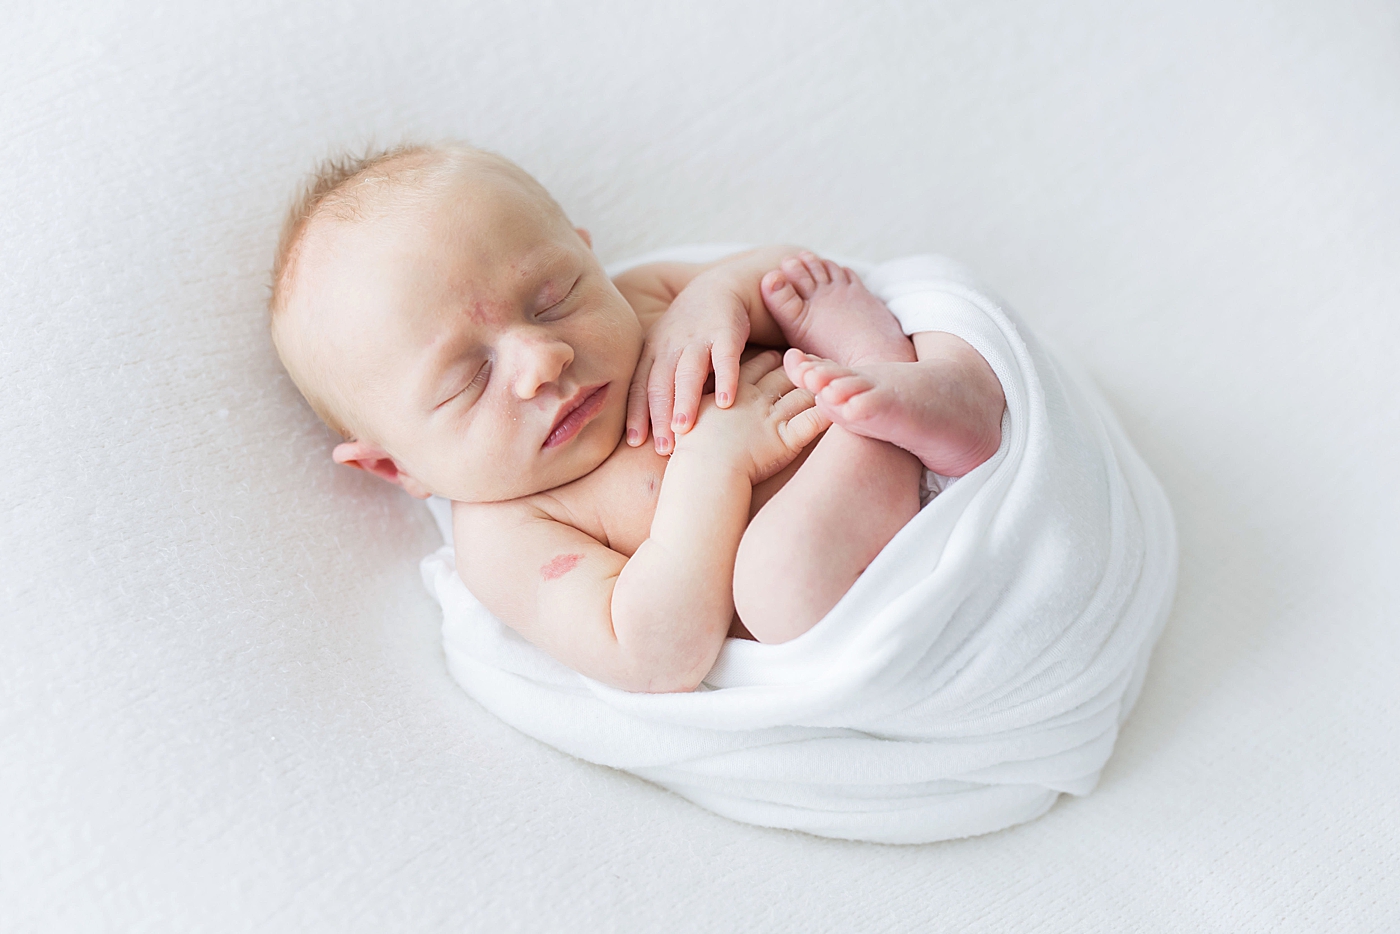 Baby boy curled up for his newborn photos. Photo by Fresh Light Photography.